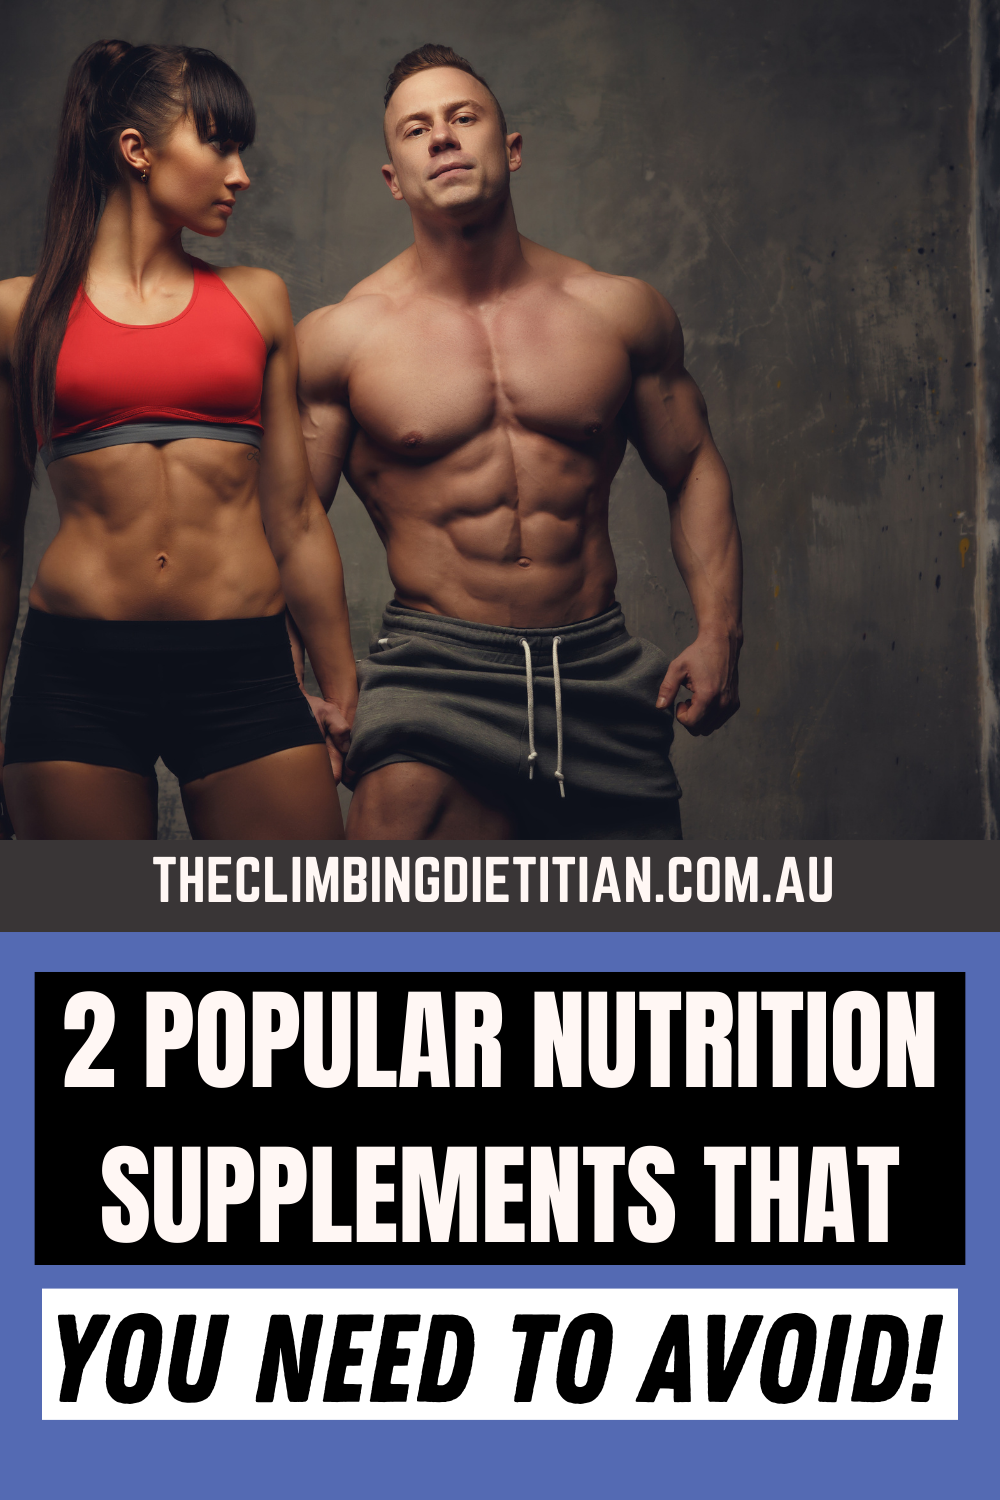 2 Popular Nutrition Supplements That Are A Waste Of Money-Brisbane Dietitian- Nutritionist-Sports Dietitian